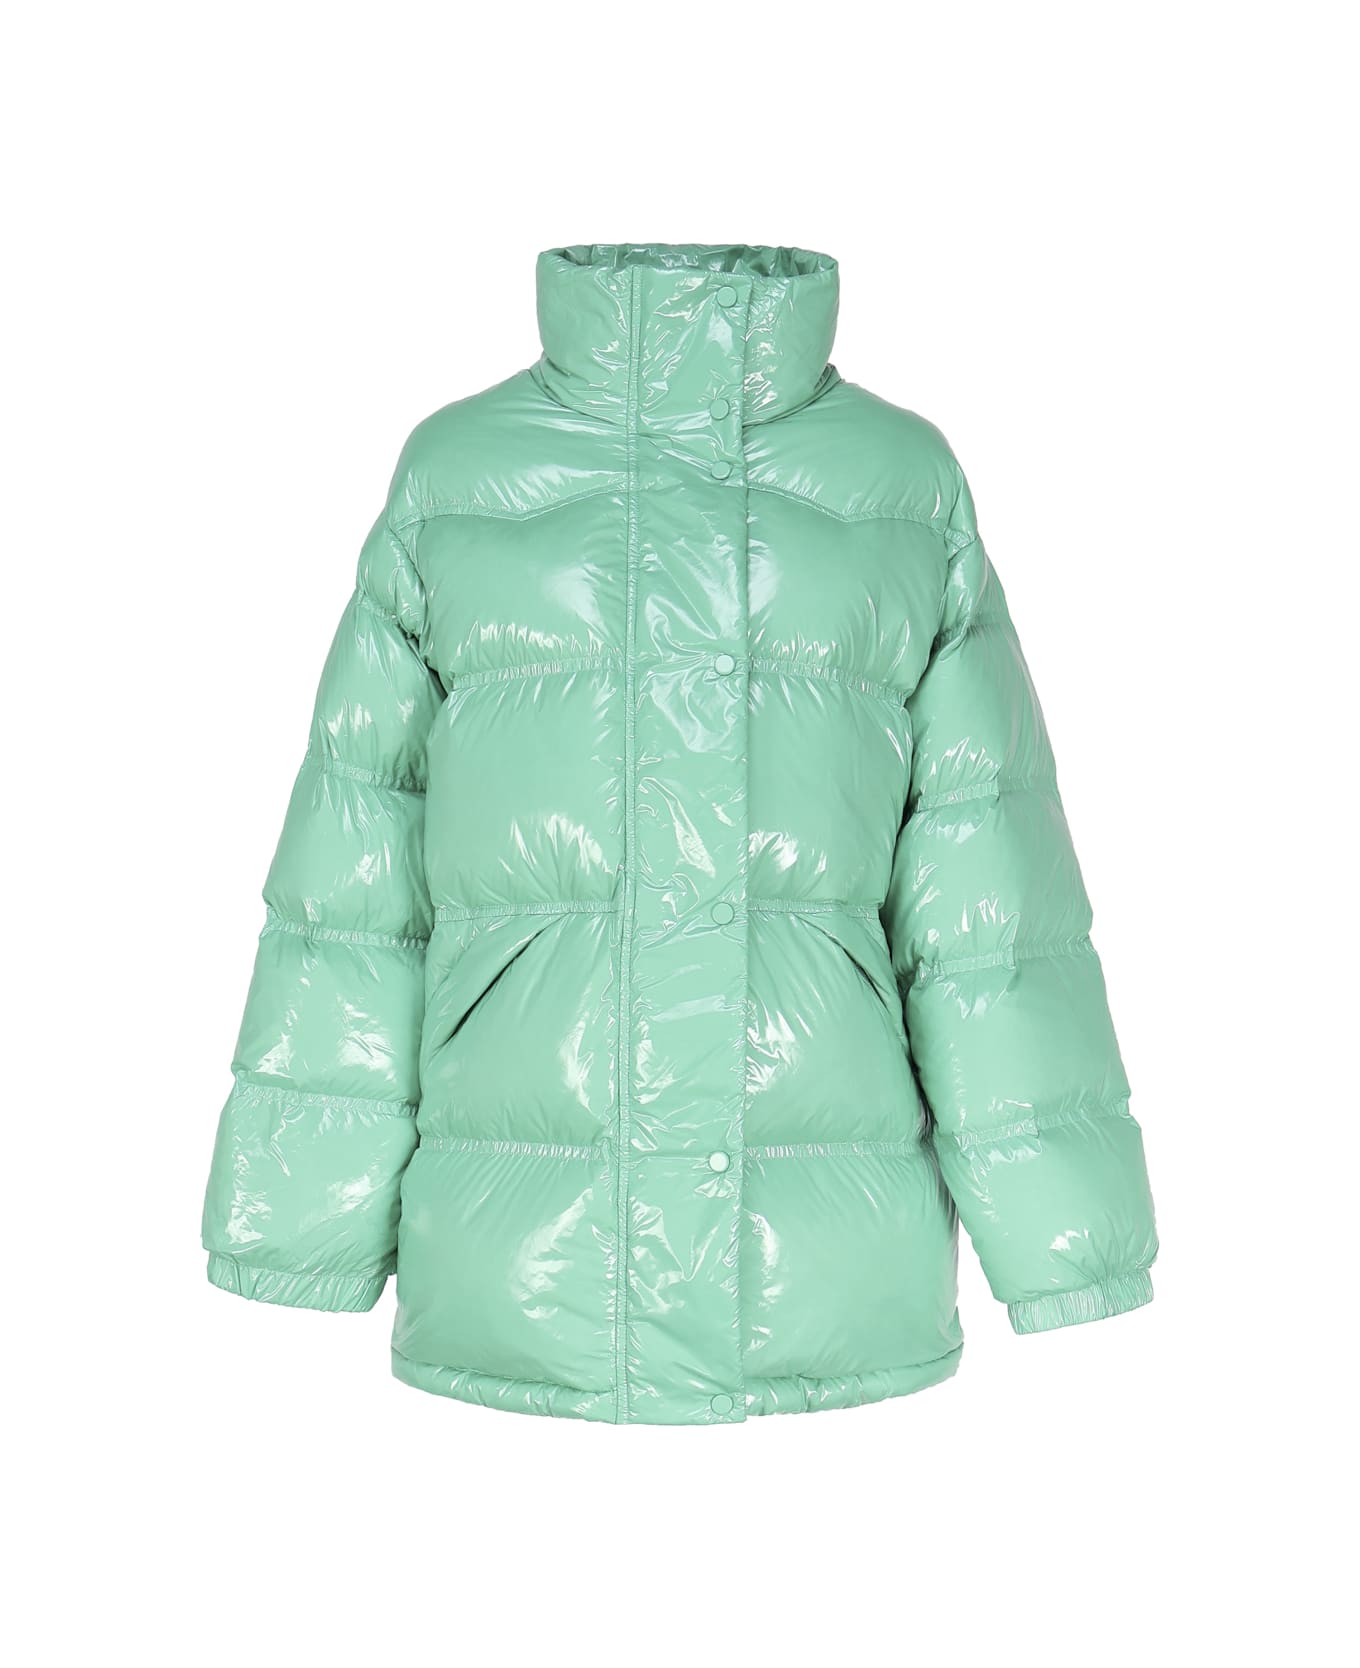 STAND STUDIO Shiny Effect Down Jacket - Green